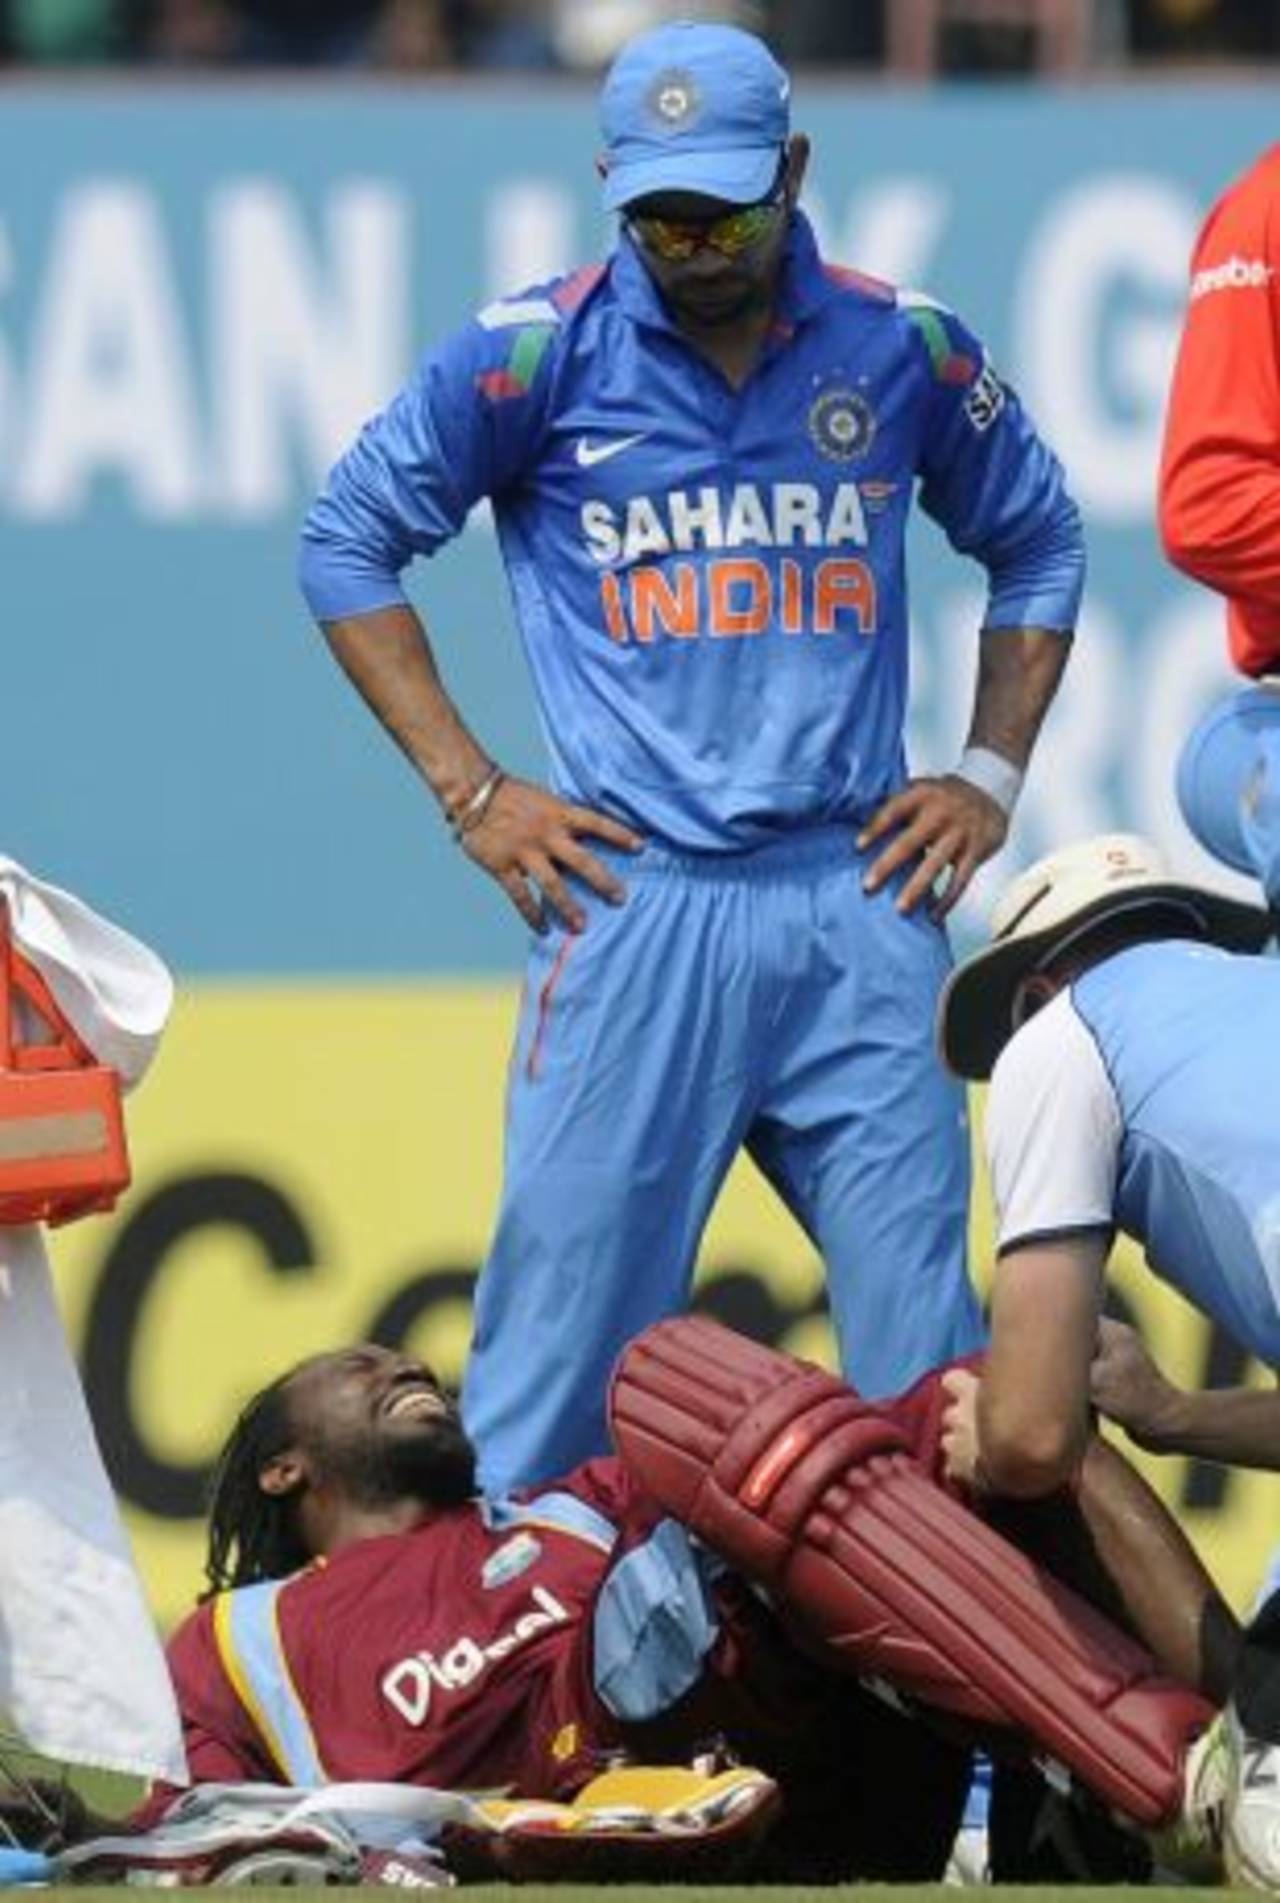 Chris Gayle was in pain after his run out, India v West Indies, 1st ODI, Kochi, November 21, 2013